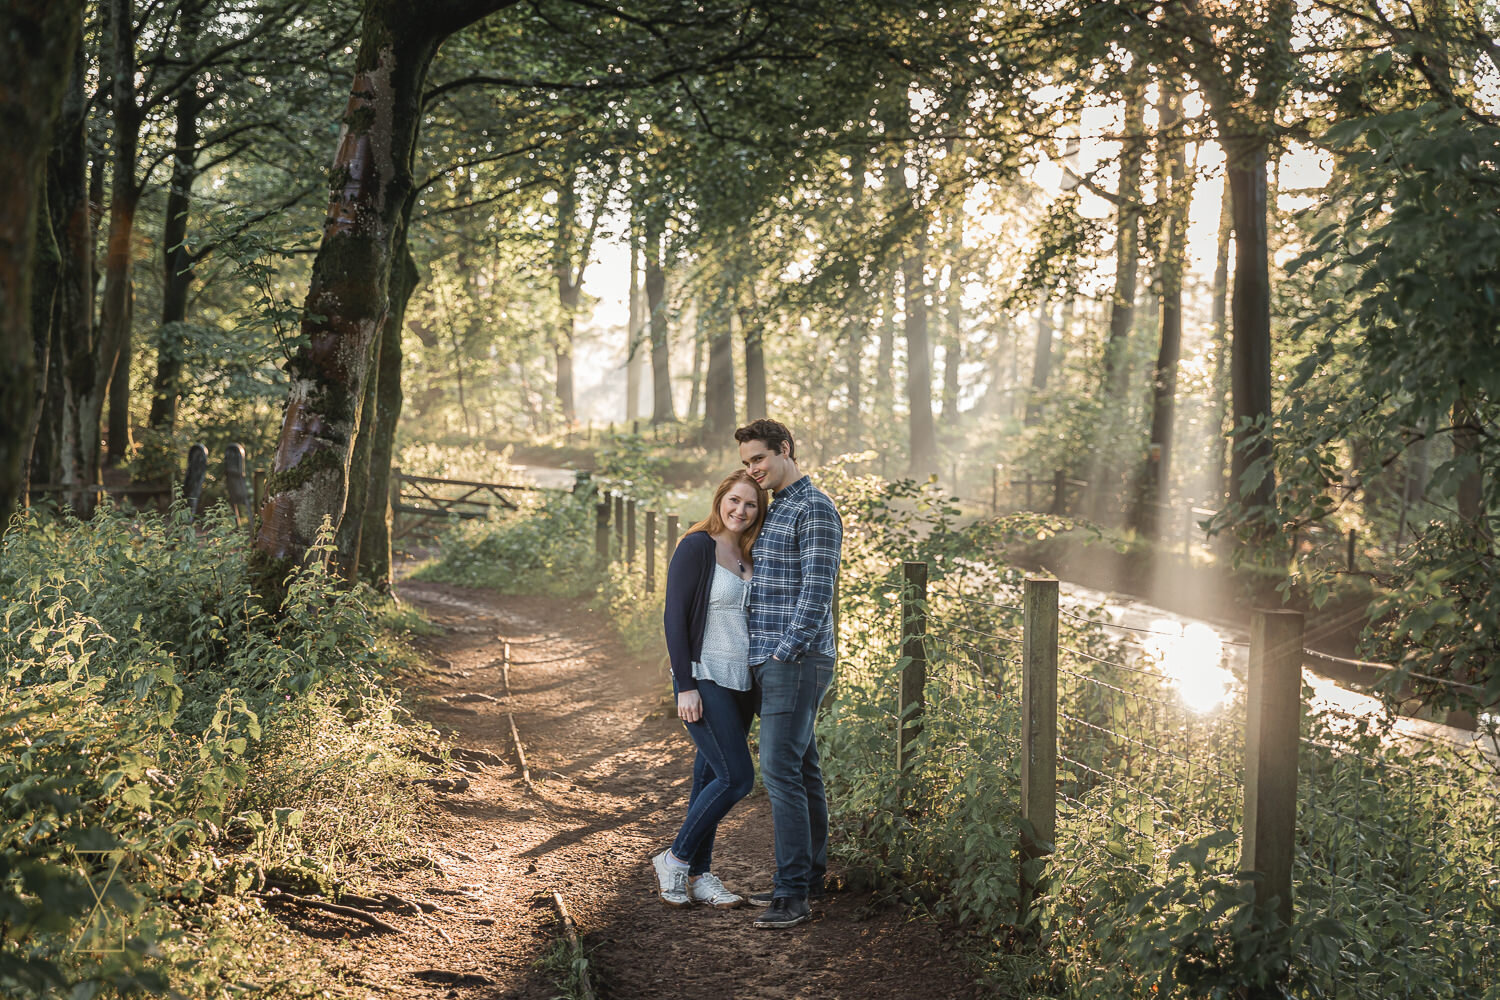 Cheshire-pre-wedding-photoshoot-in-the-forest-029.jpg